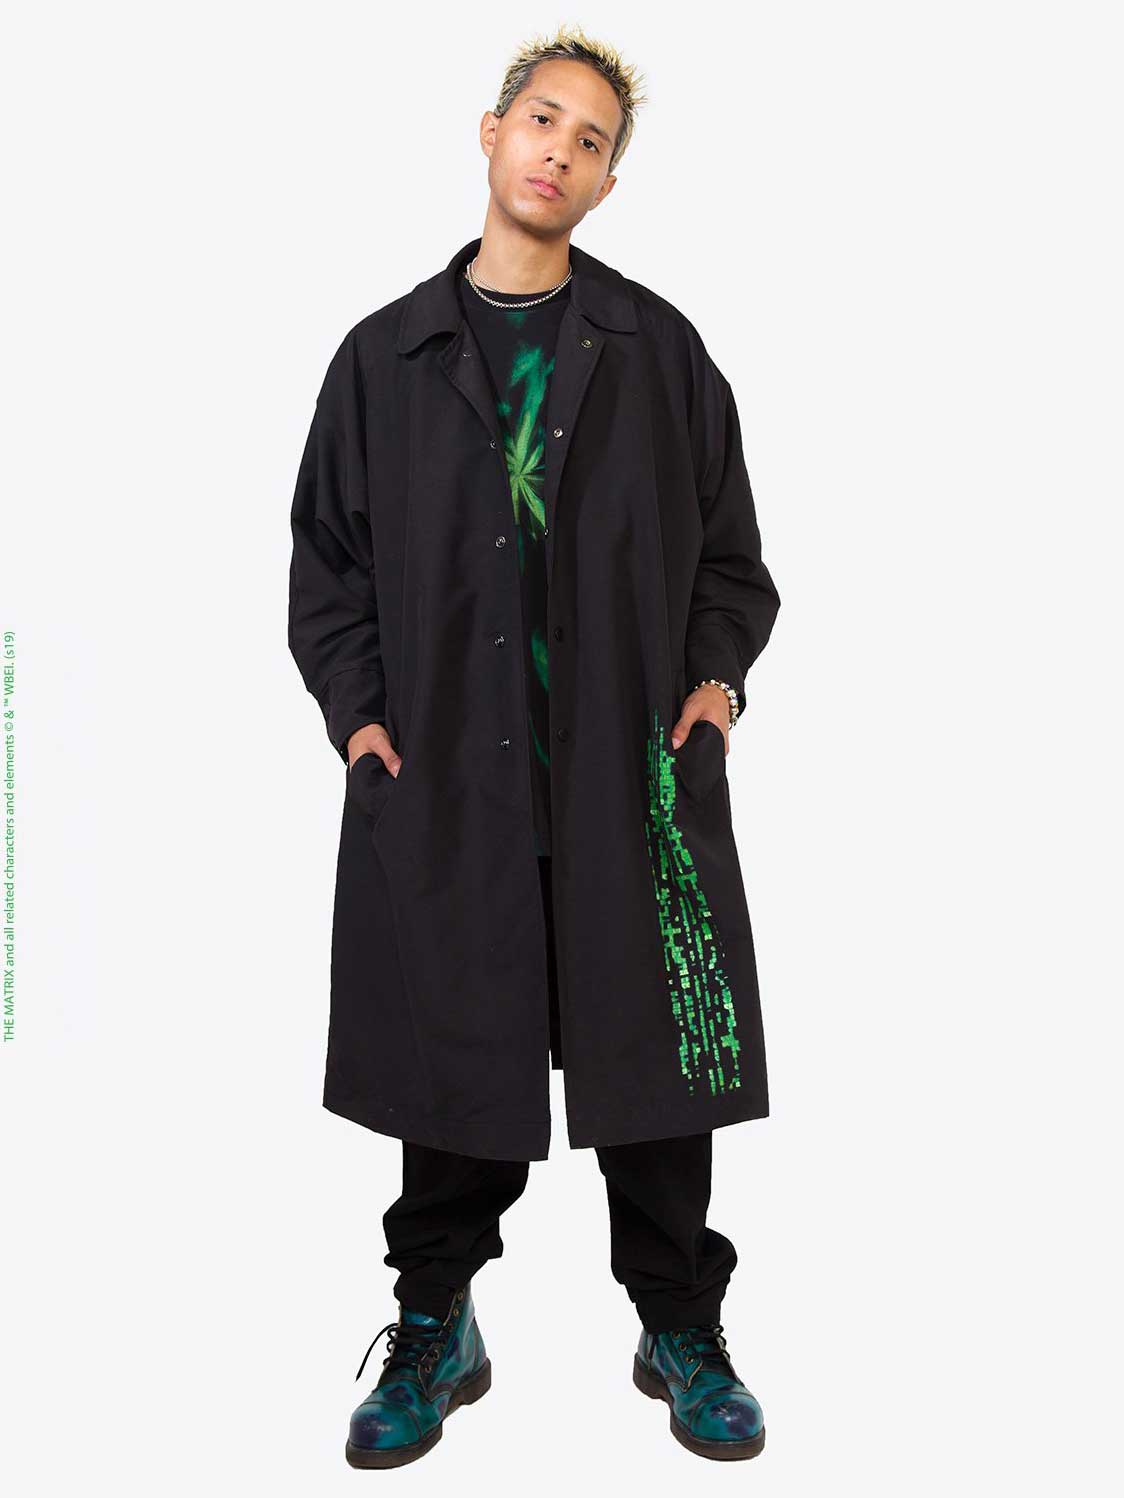 black trench coat with green print liner